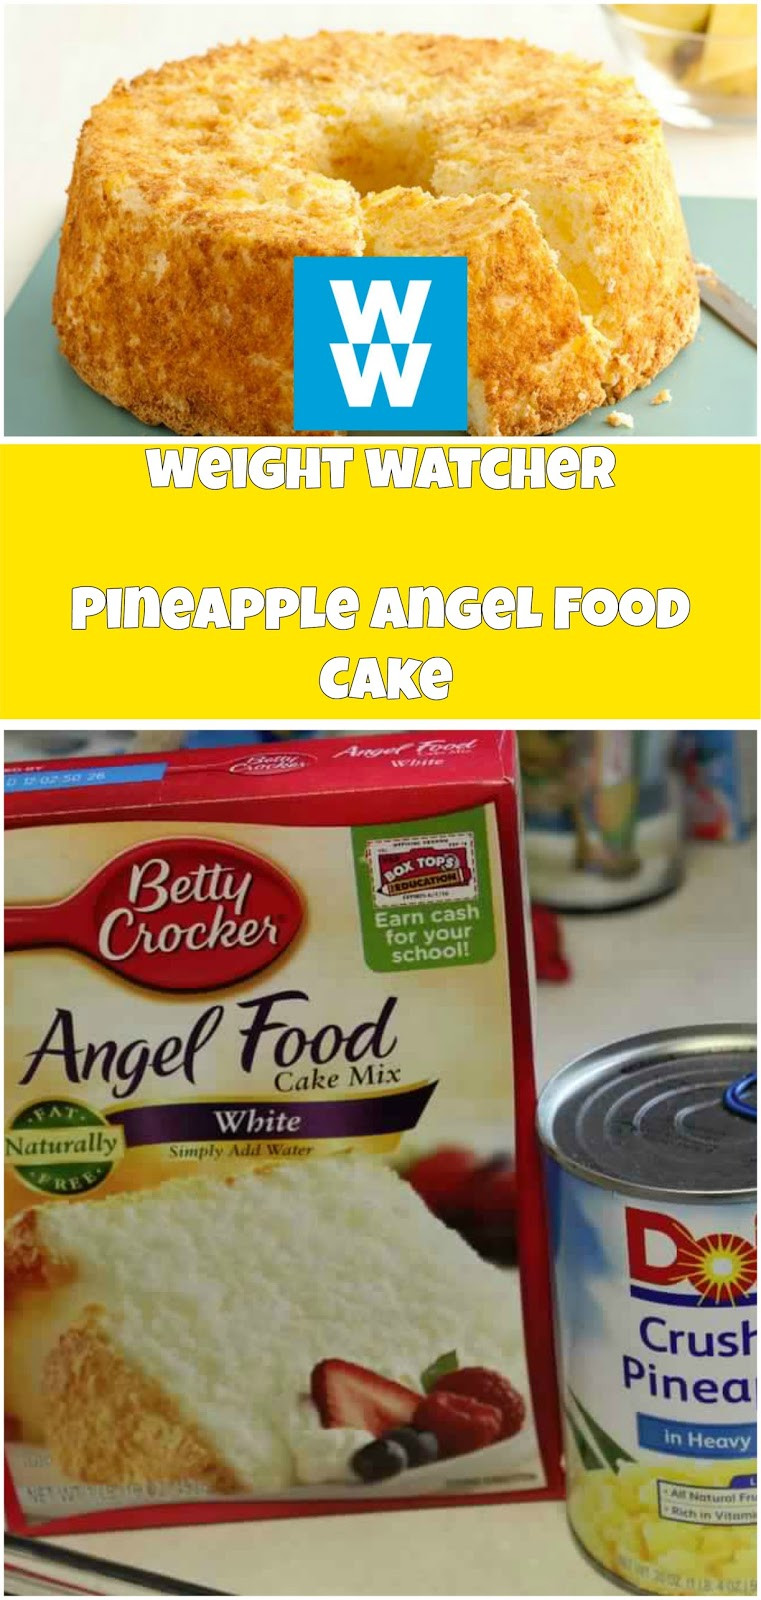 Weight Watchers Angel Food Cake Recipes
 weight watchers recipes Pineapple Angel Food Cake 5